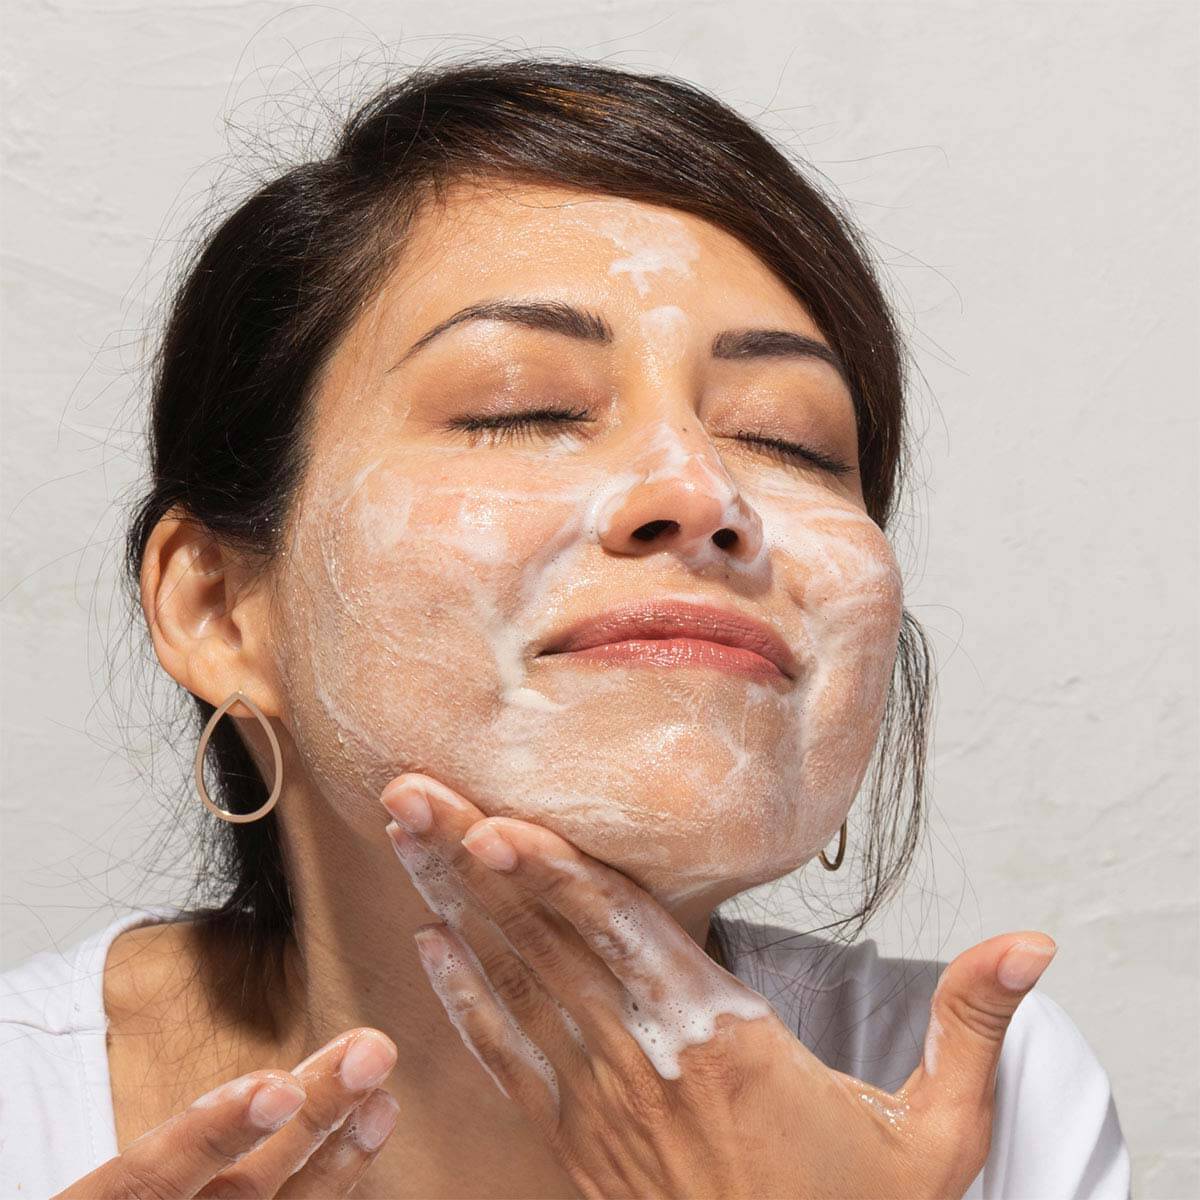 Woman using an everyday facial cleanser to clean her face